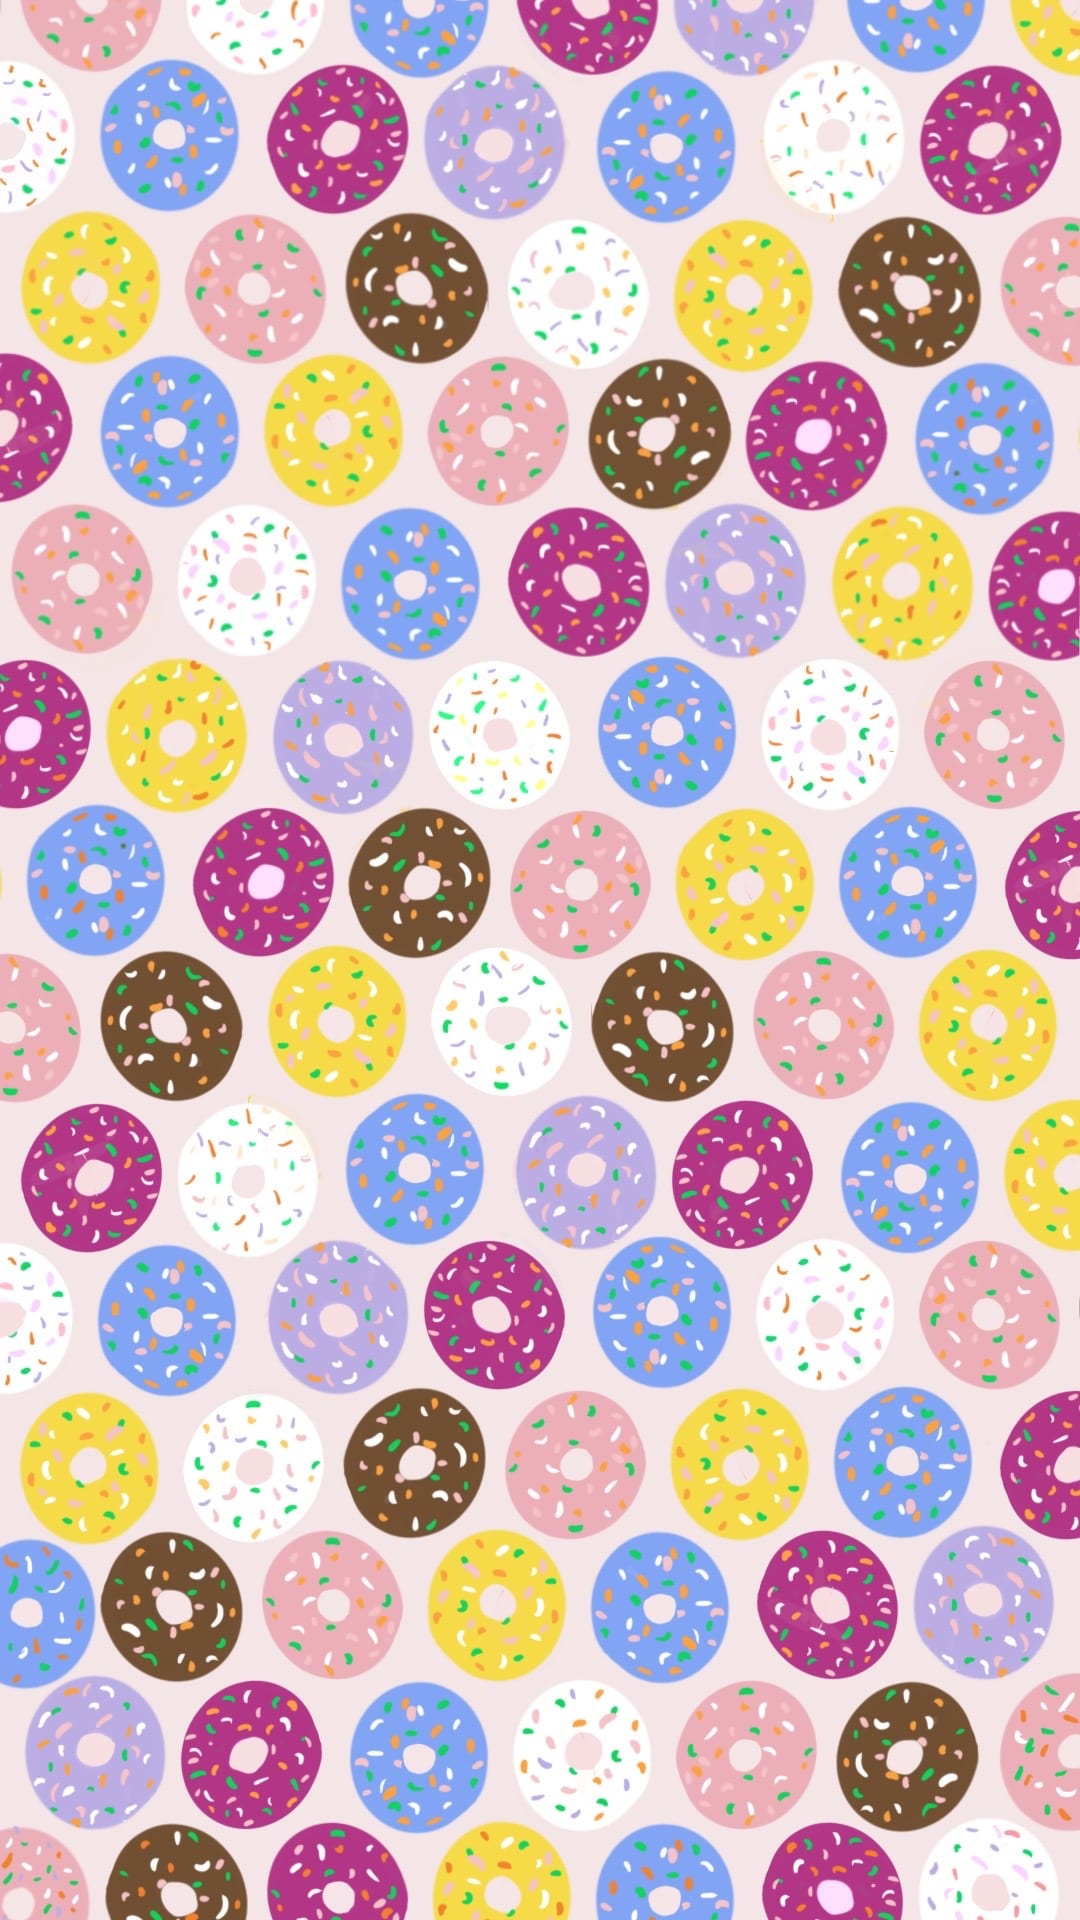 Phone Background / Wallpaper – Donuts by Wanda Lopez Designs